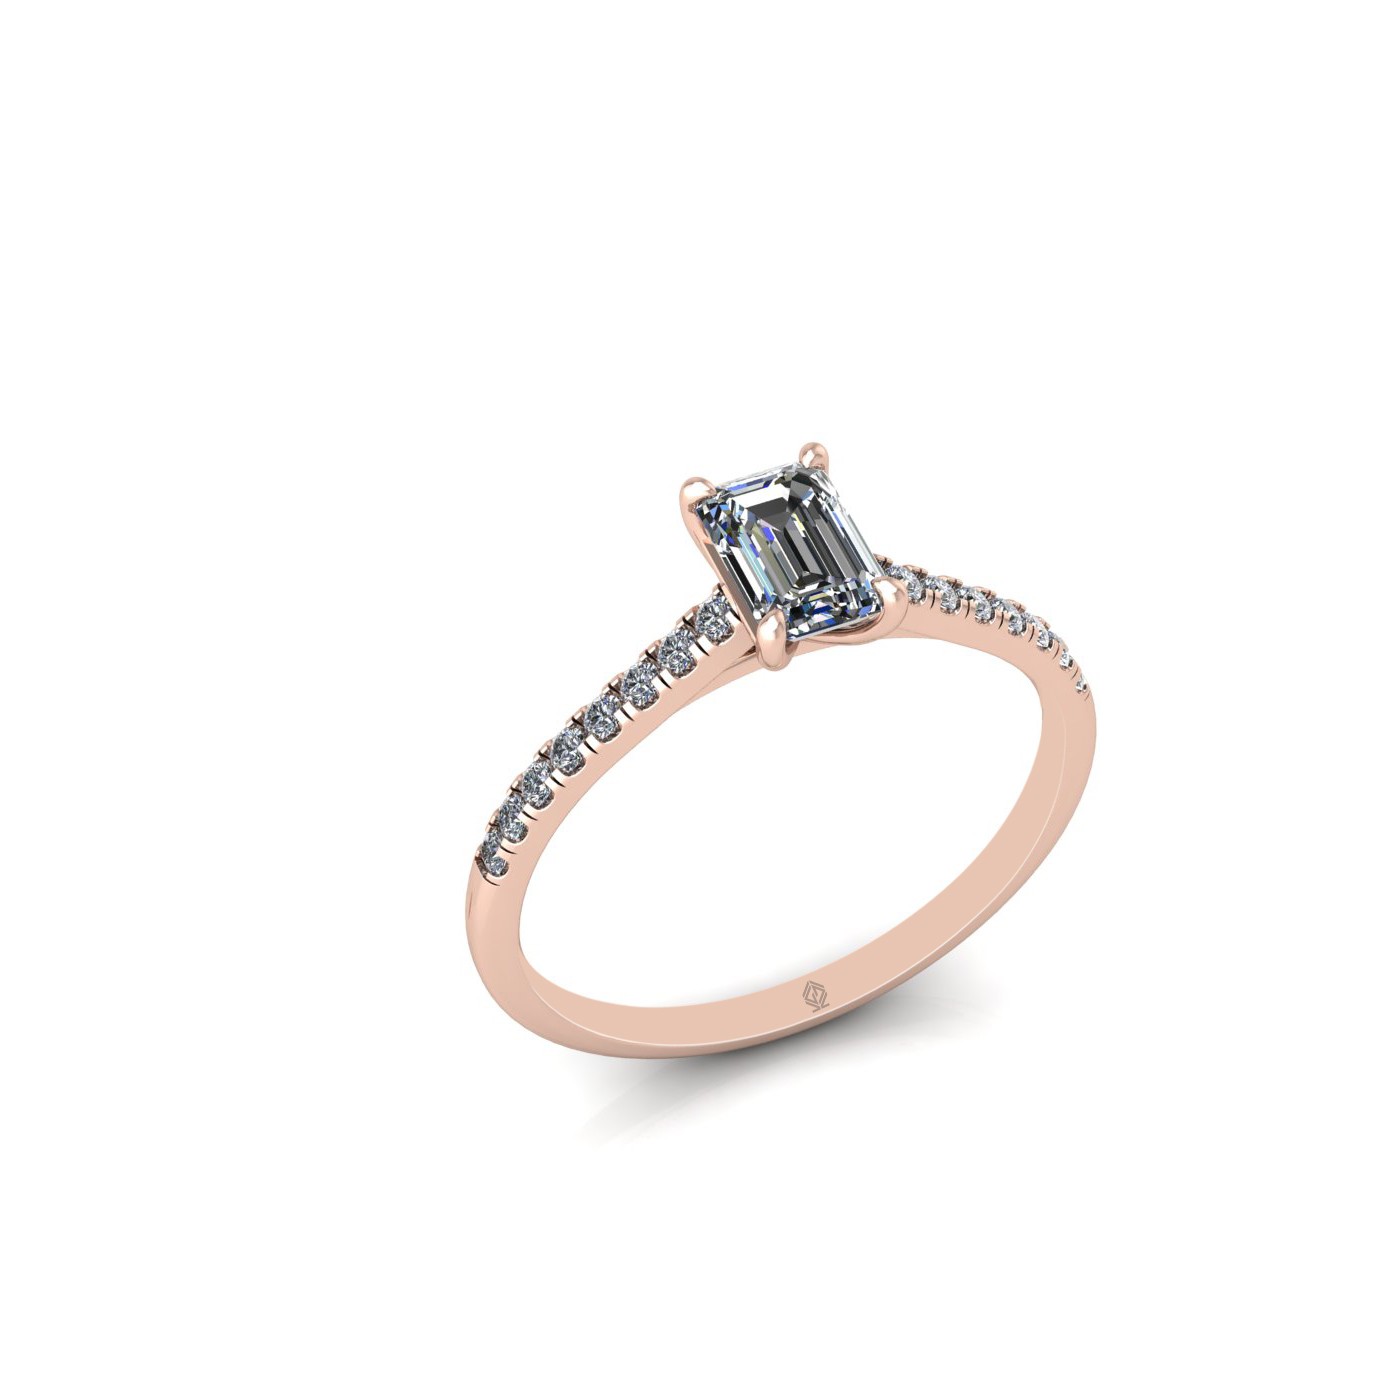 18k rose gold 0,50 ct 4 prongs emerald cut diamond engagement ring with whisper thin pavÉ set band Photos & images